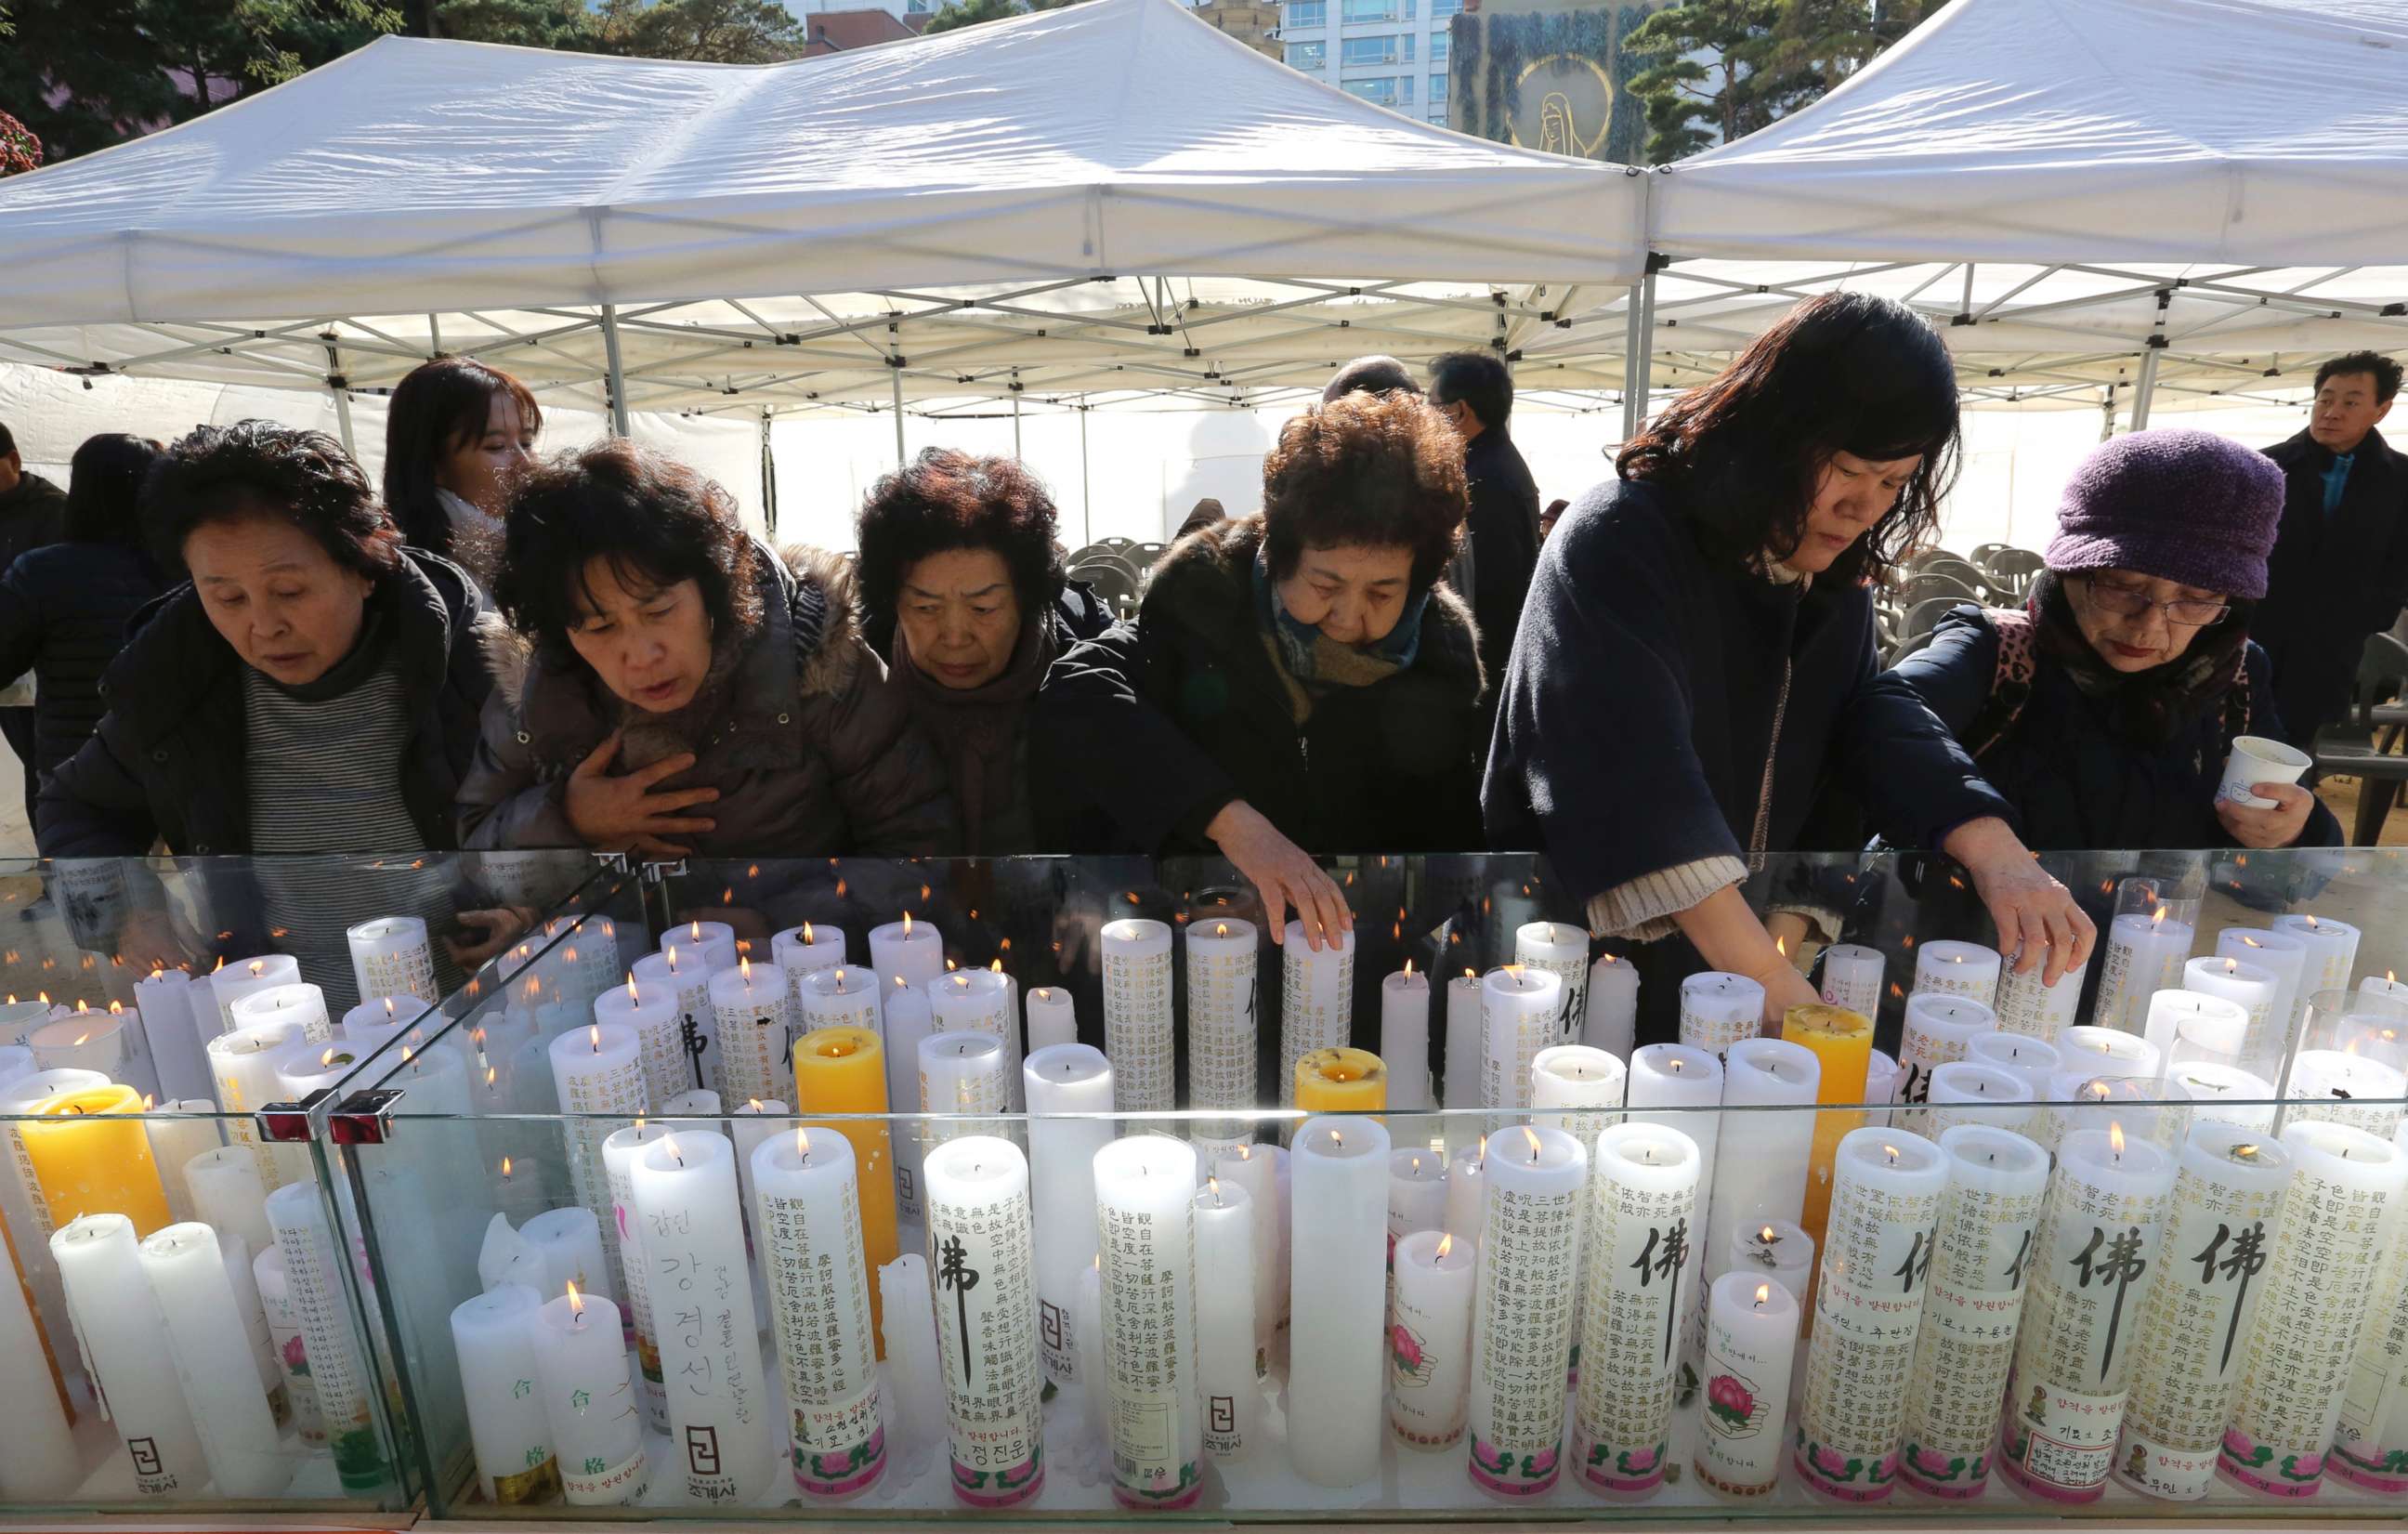 PHOTO: Women place candles during a special service to wish for their family members' success in the college entrance exams at the Jogye temple in Seoul, South Korea, Nov. 23, 2017.